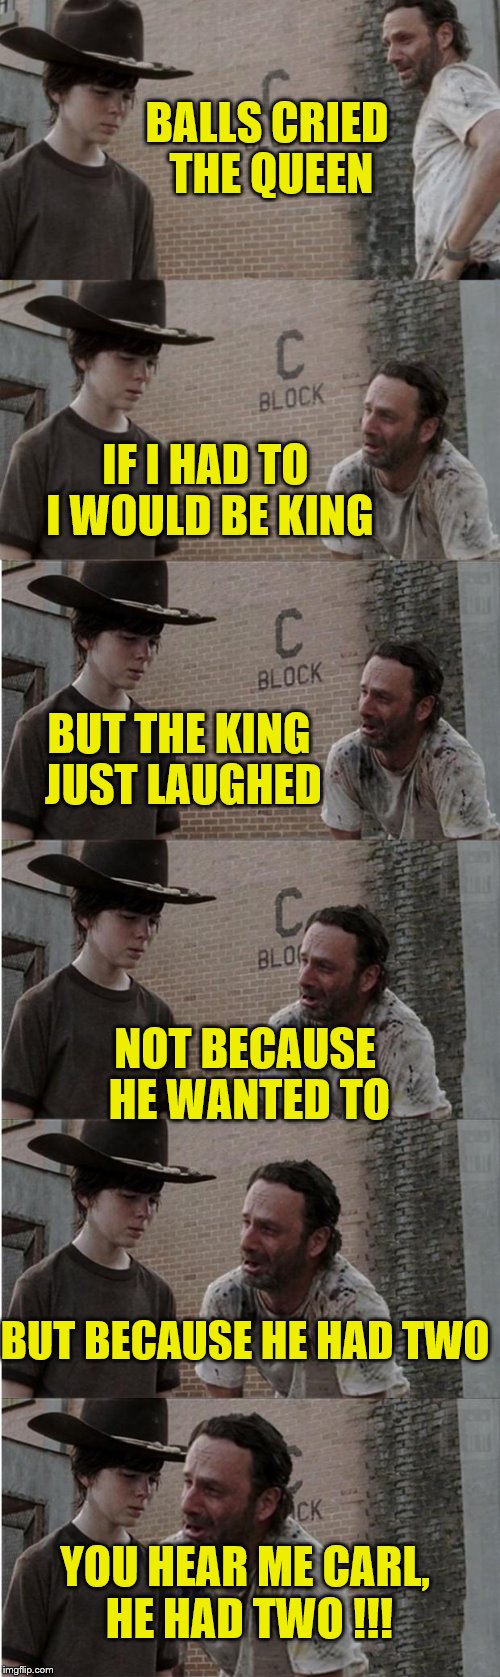 Rick tells a joke. Not a good one, but still, it's a joke | BALLS CRIED THE QUEEN; IF I HAD TO I WOULD BE KING; BUT THE KING JUST LAUGHED; NOT BECAUSE HE WANTED TO; BUT BECAUSE HE HAD TWO; YOU HEAR ME CARL, HE HAD TWO !!! | image tagged in memes,rick and carl longer,jokes | made w/ Imgflip meme maker